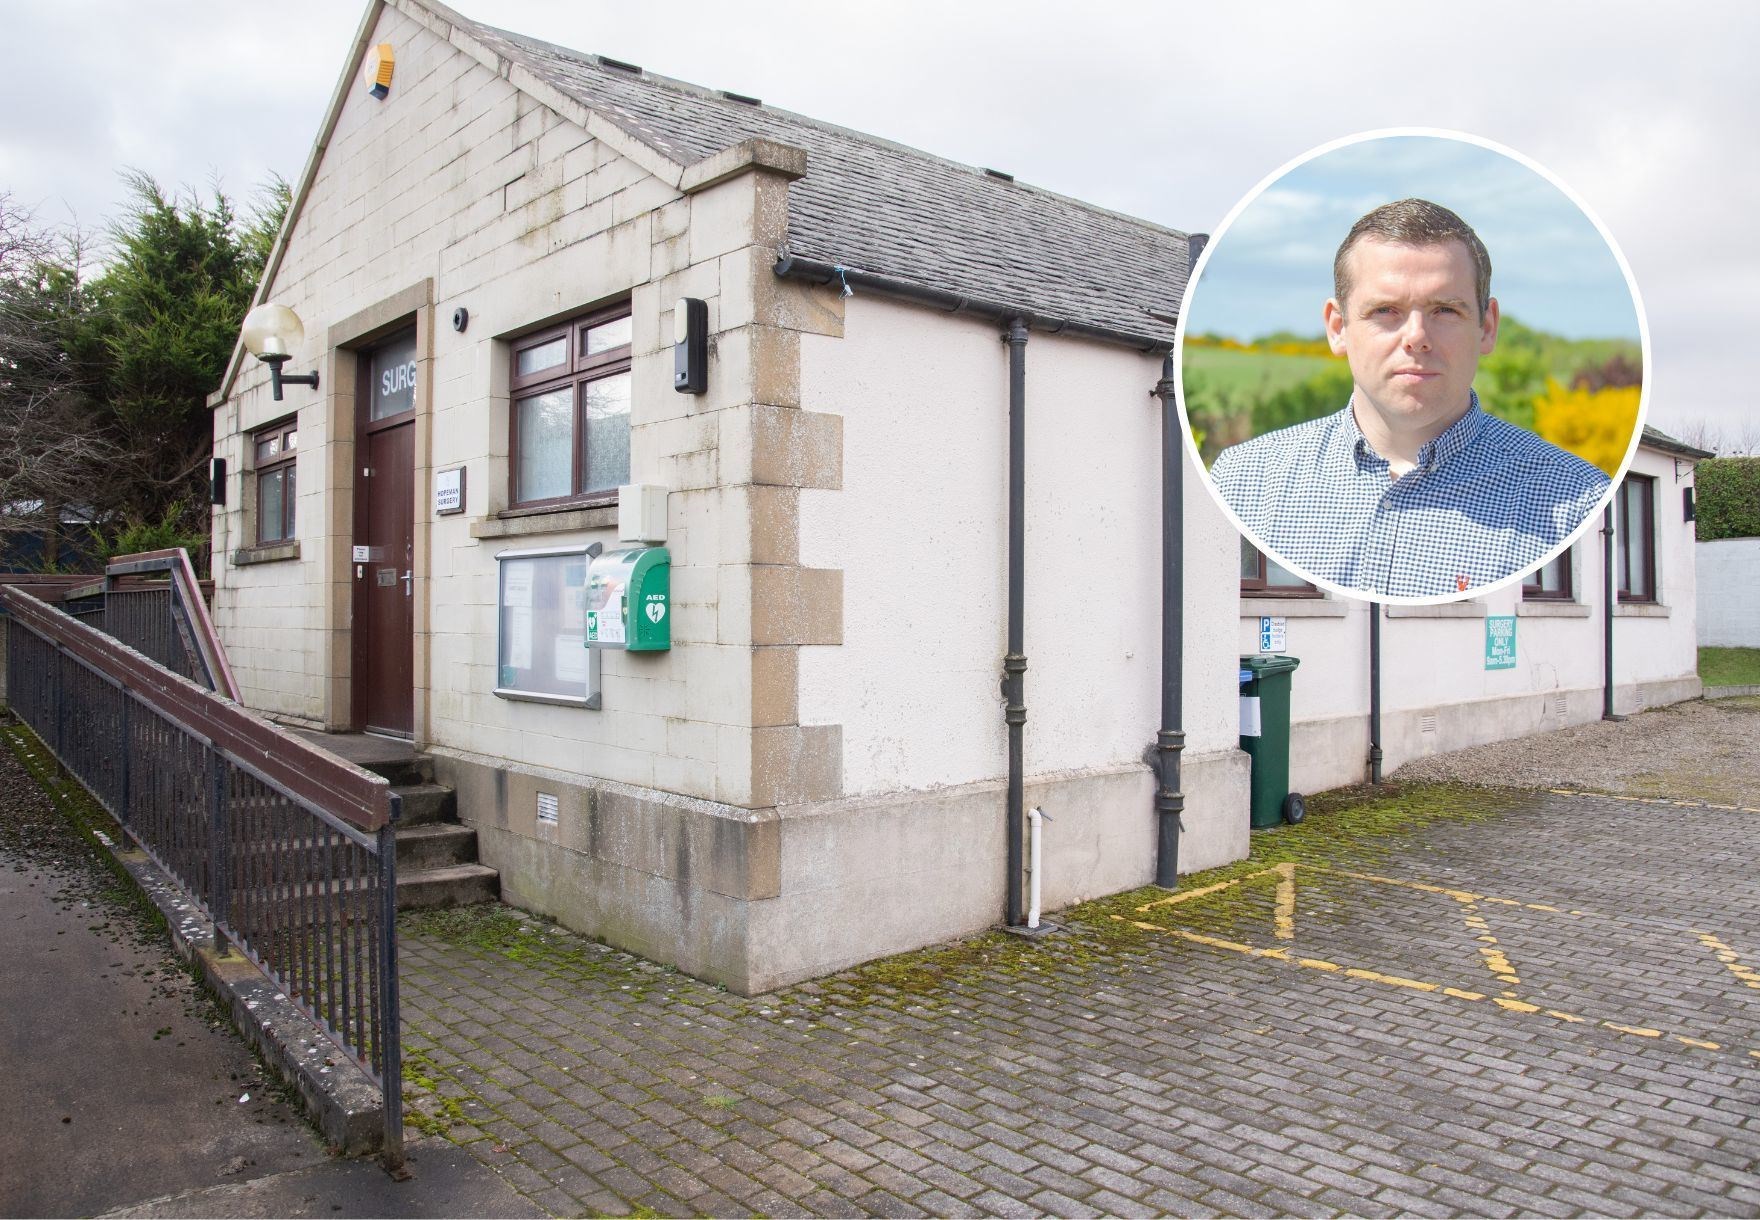 Douglas Ross (inset) received the email which was related to surgeries in Hopeman and Burghead.